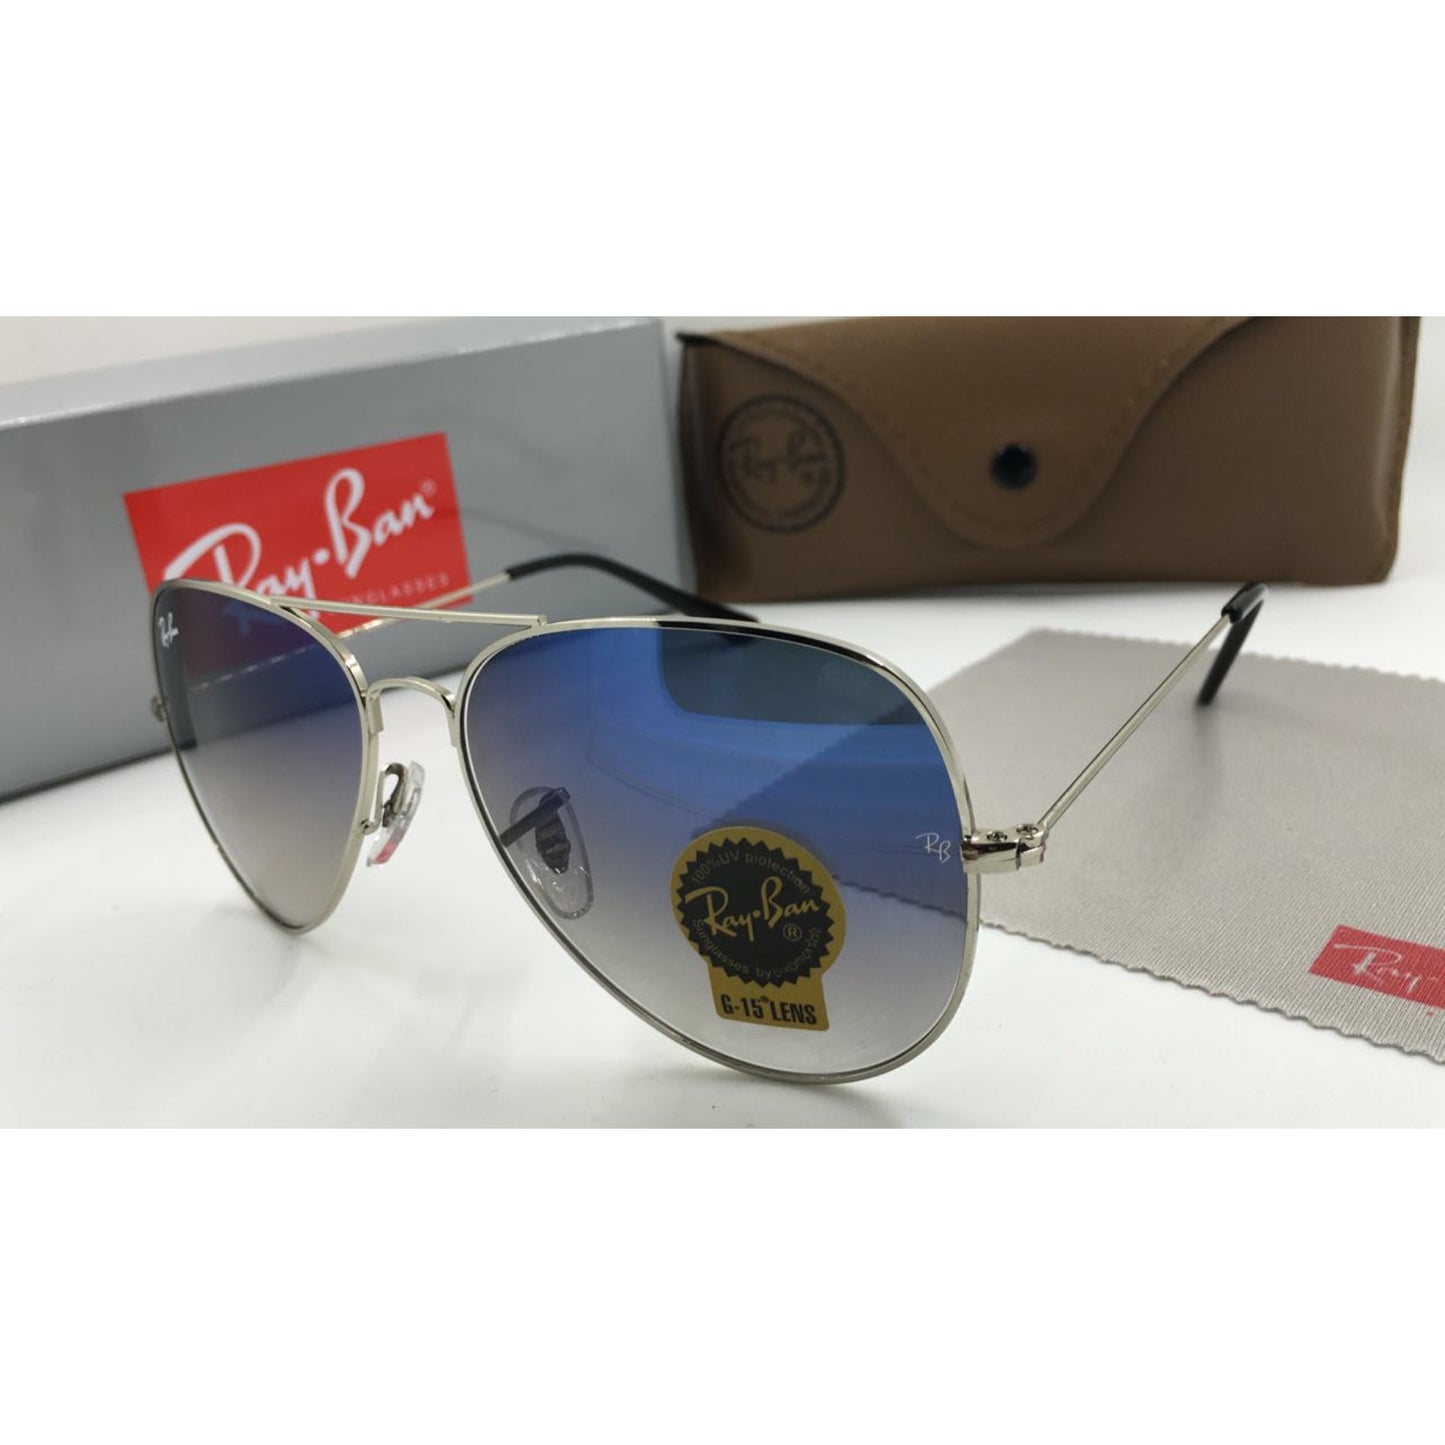 Latest Light Weight Trendy Hot Favorite All Season Special Ray Ban Fancy Sunglass For Daily Causal Evergreen UV Protected For Unisex.